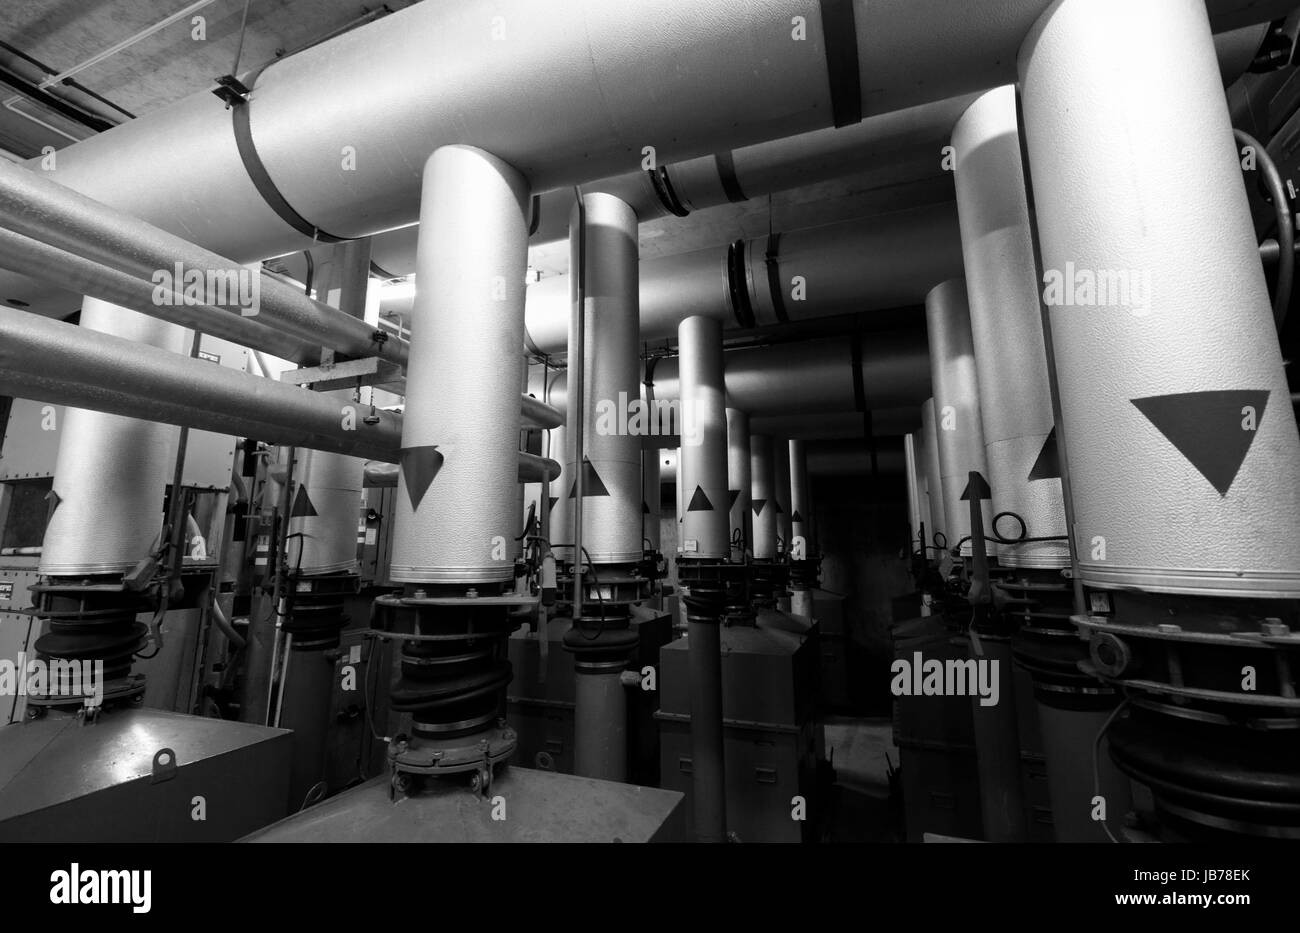 Metal pipework part of air pumping and filtration system in an underground bunker. Stock Photo